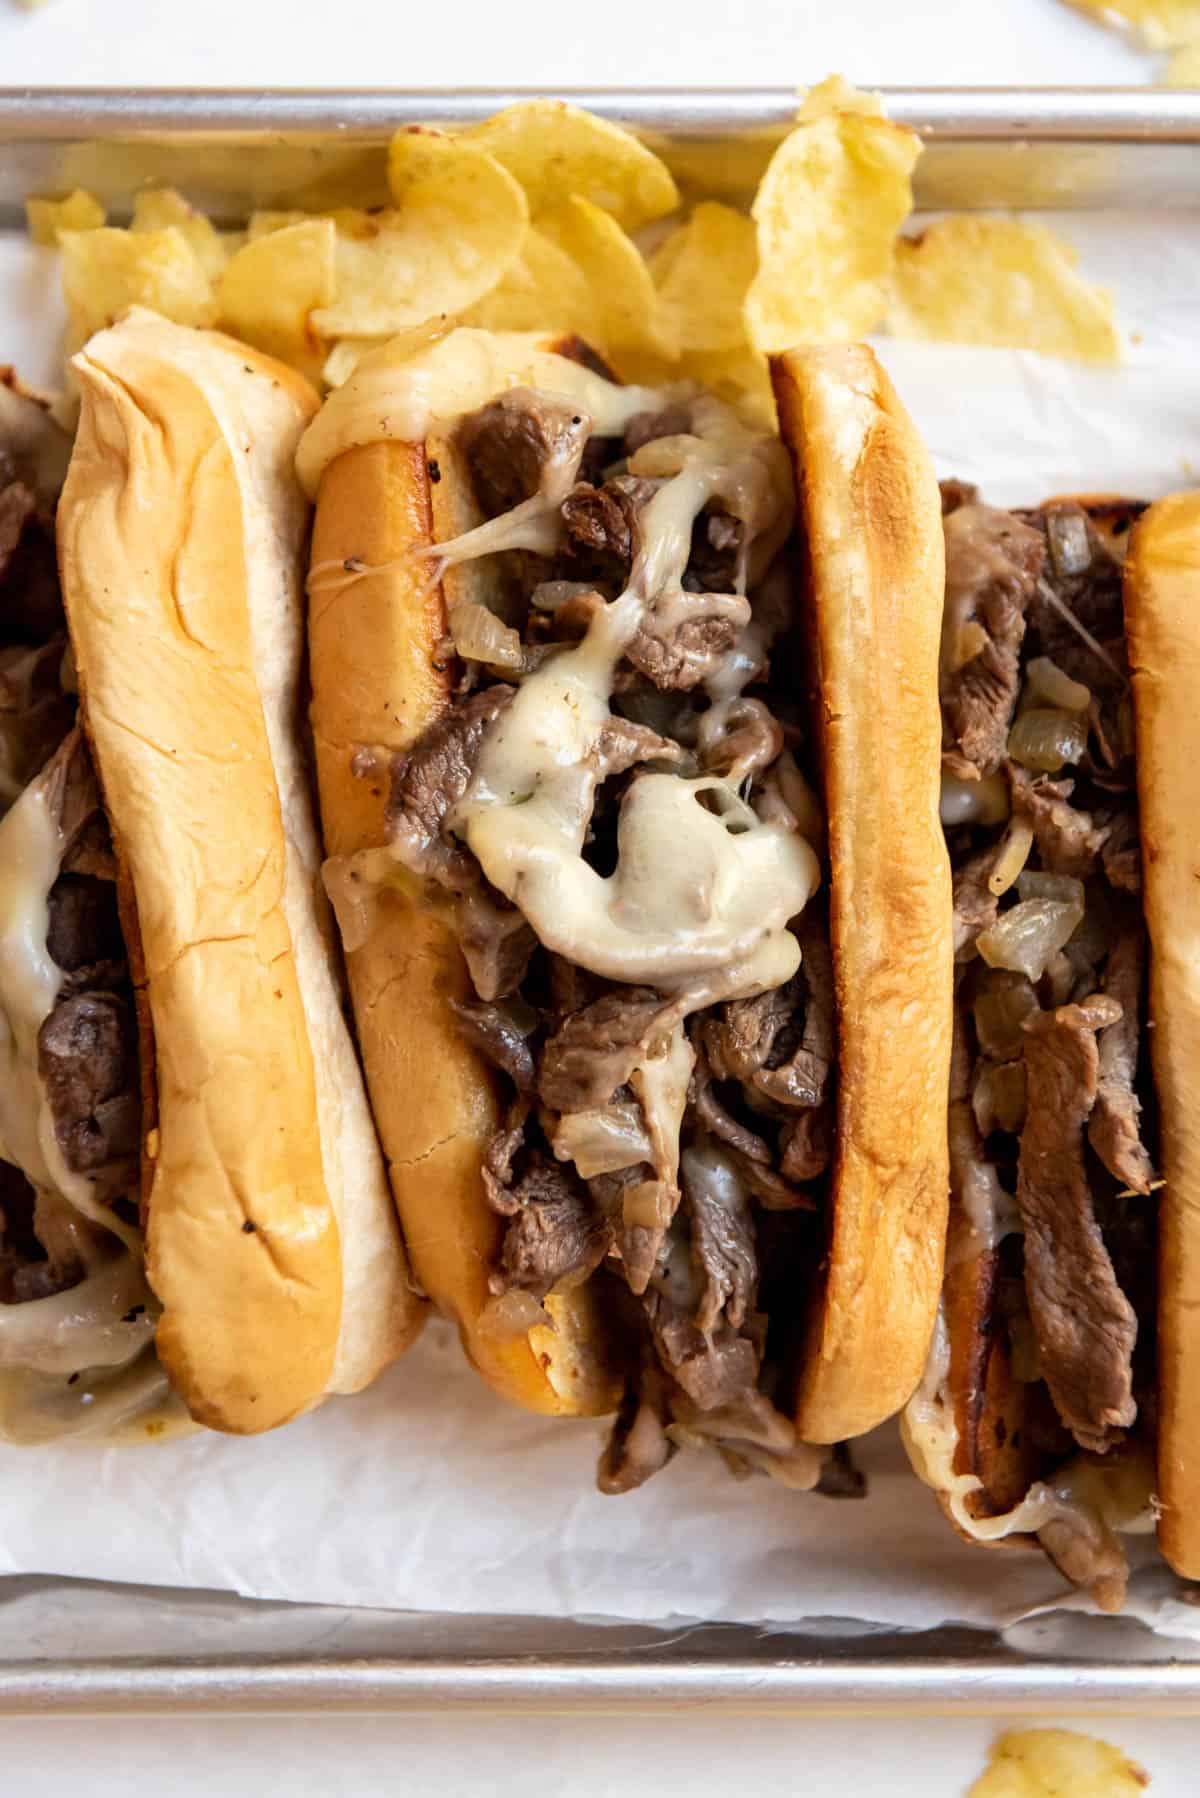 Melted cheese on hot Philly cheese steaks.